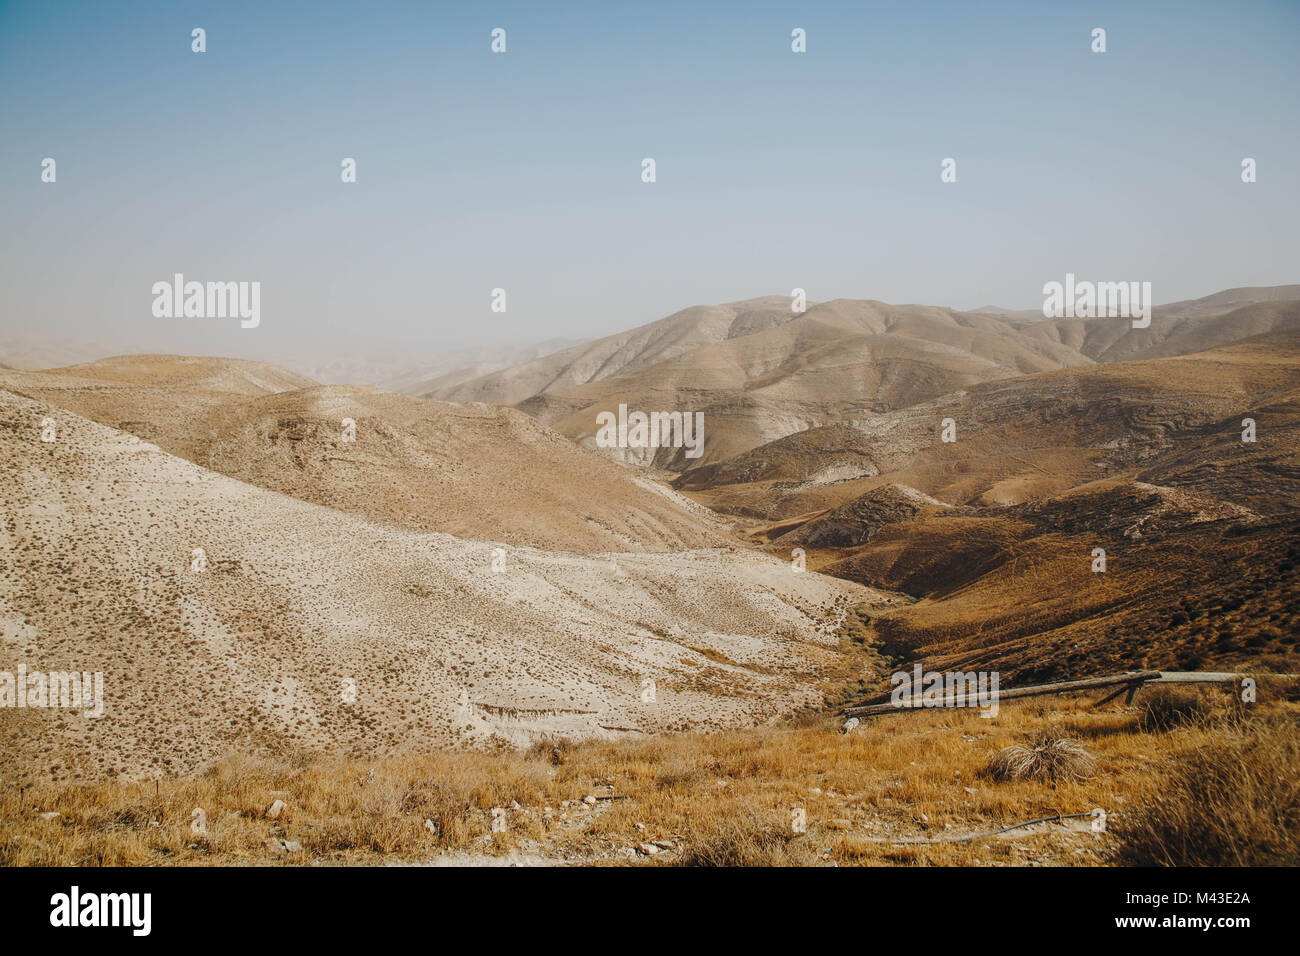 View of Judean Desert and Mountains in Yishuv Alon Stock Photo